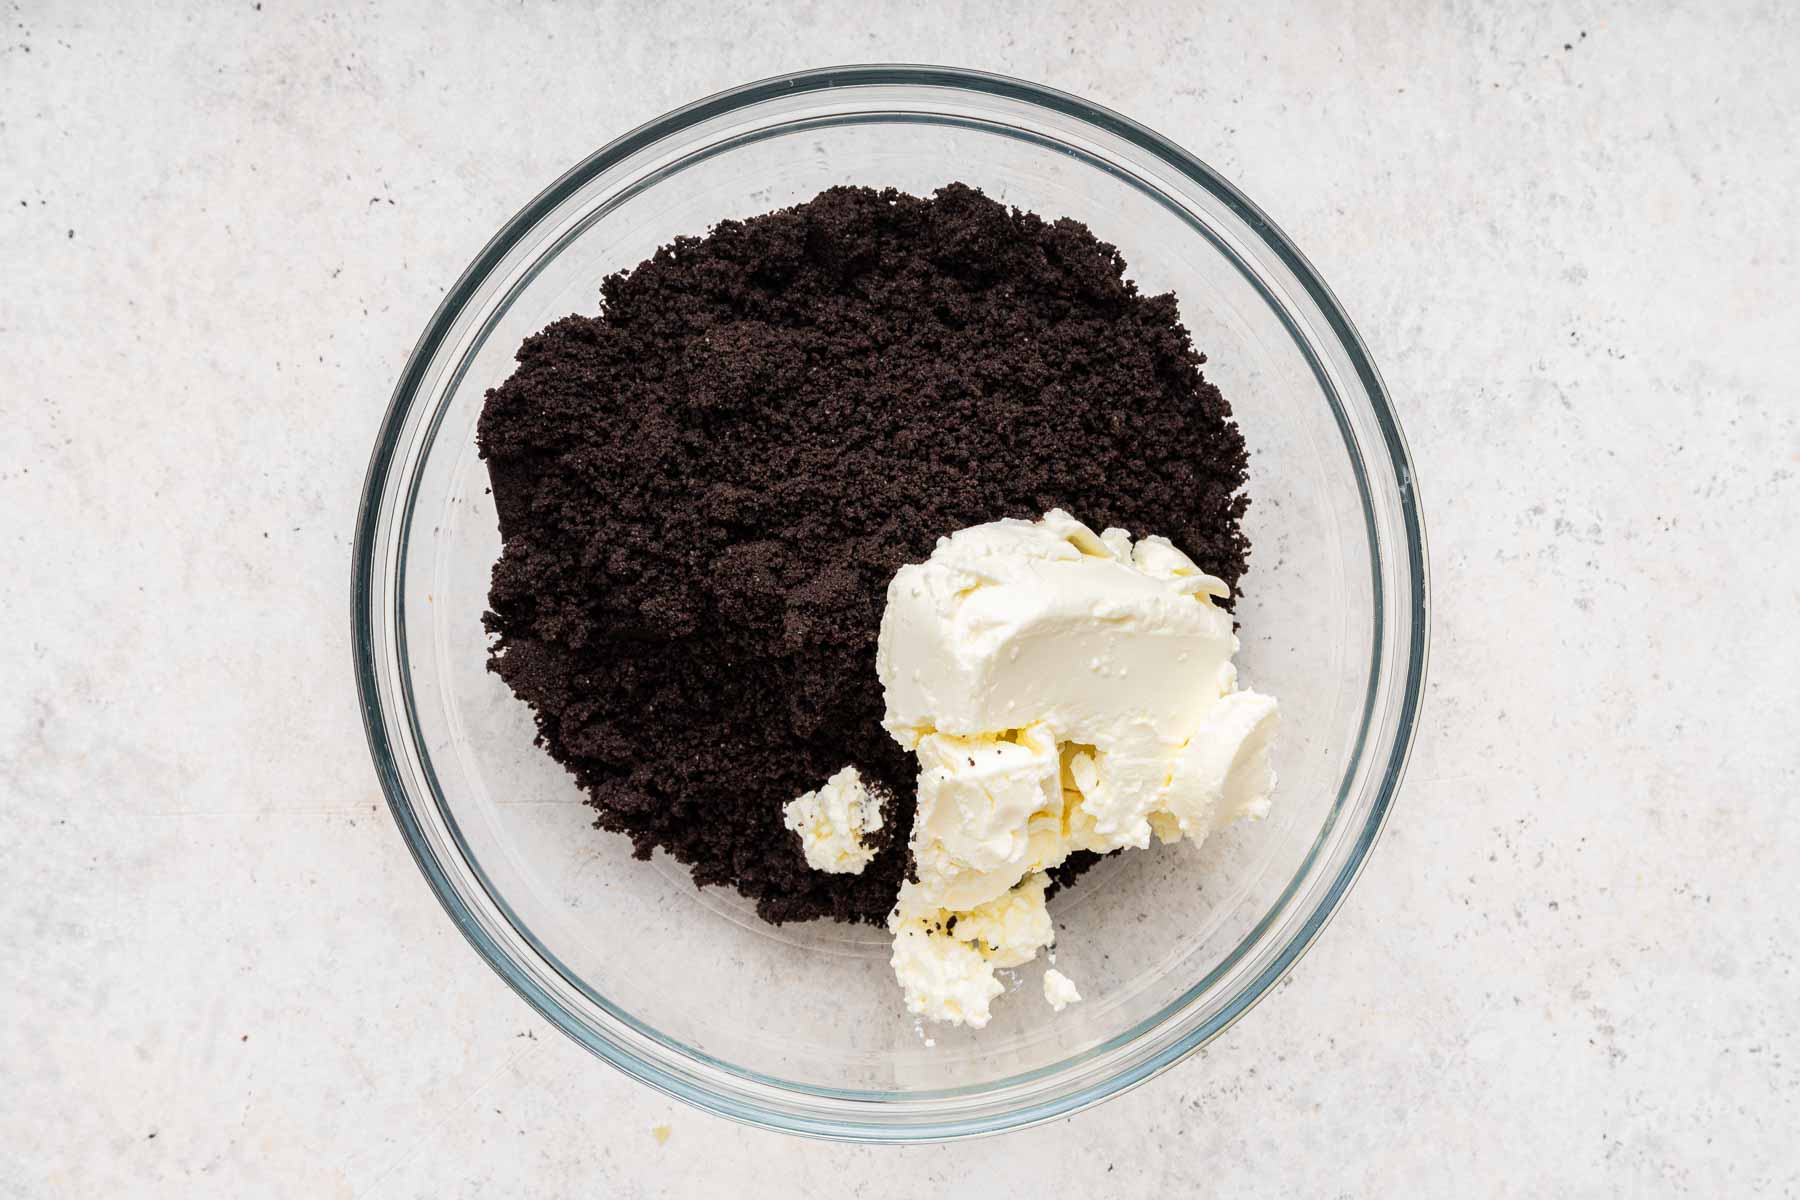 Bowl with crushed black cookies and a scoop of white cream cheese on the side.